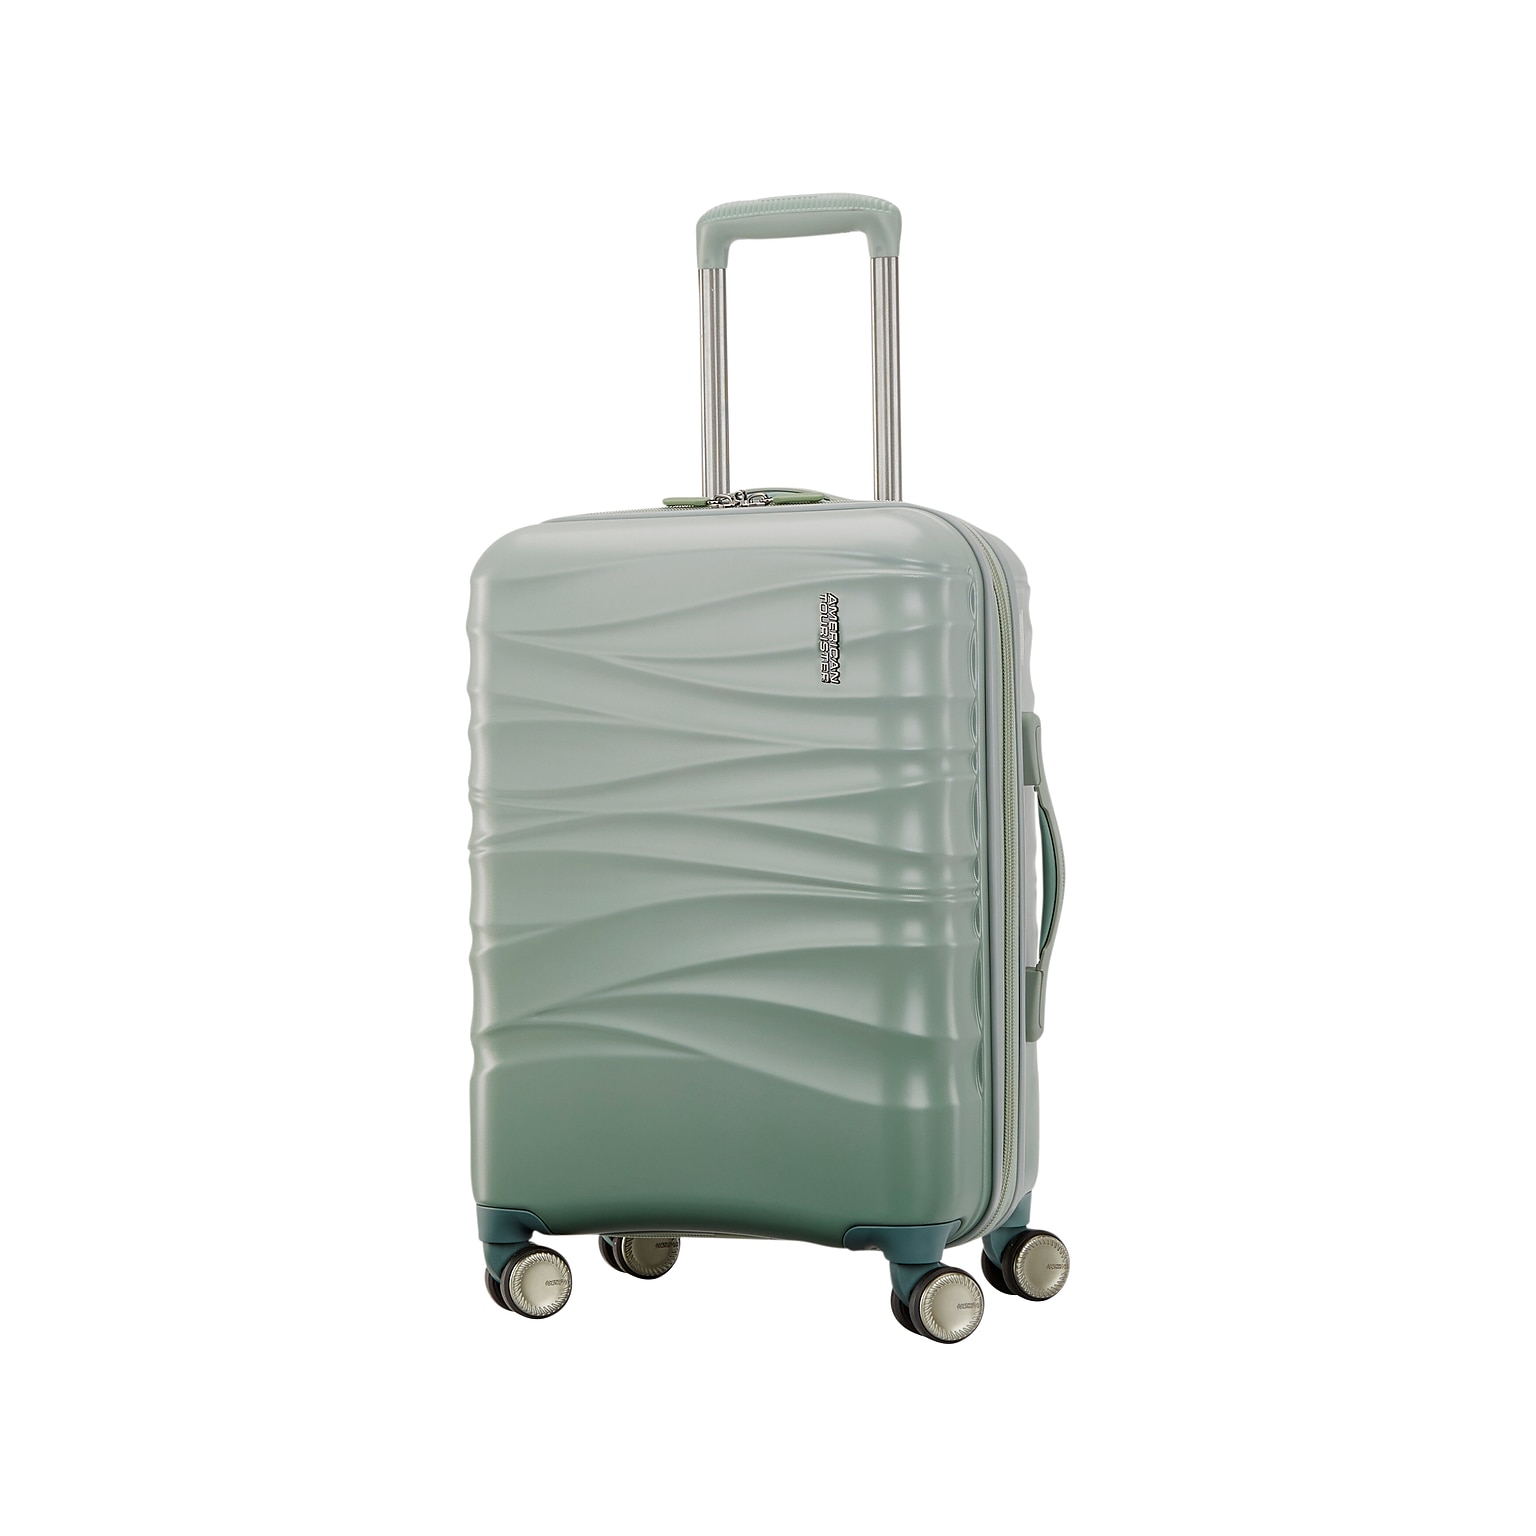 American Tourister Cascade 22 Hardside Carry-On Suitcase, 4-Wheeled Spinner, Sage Green (143244-2017)